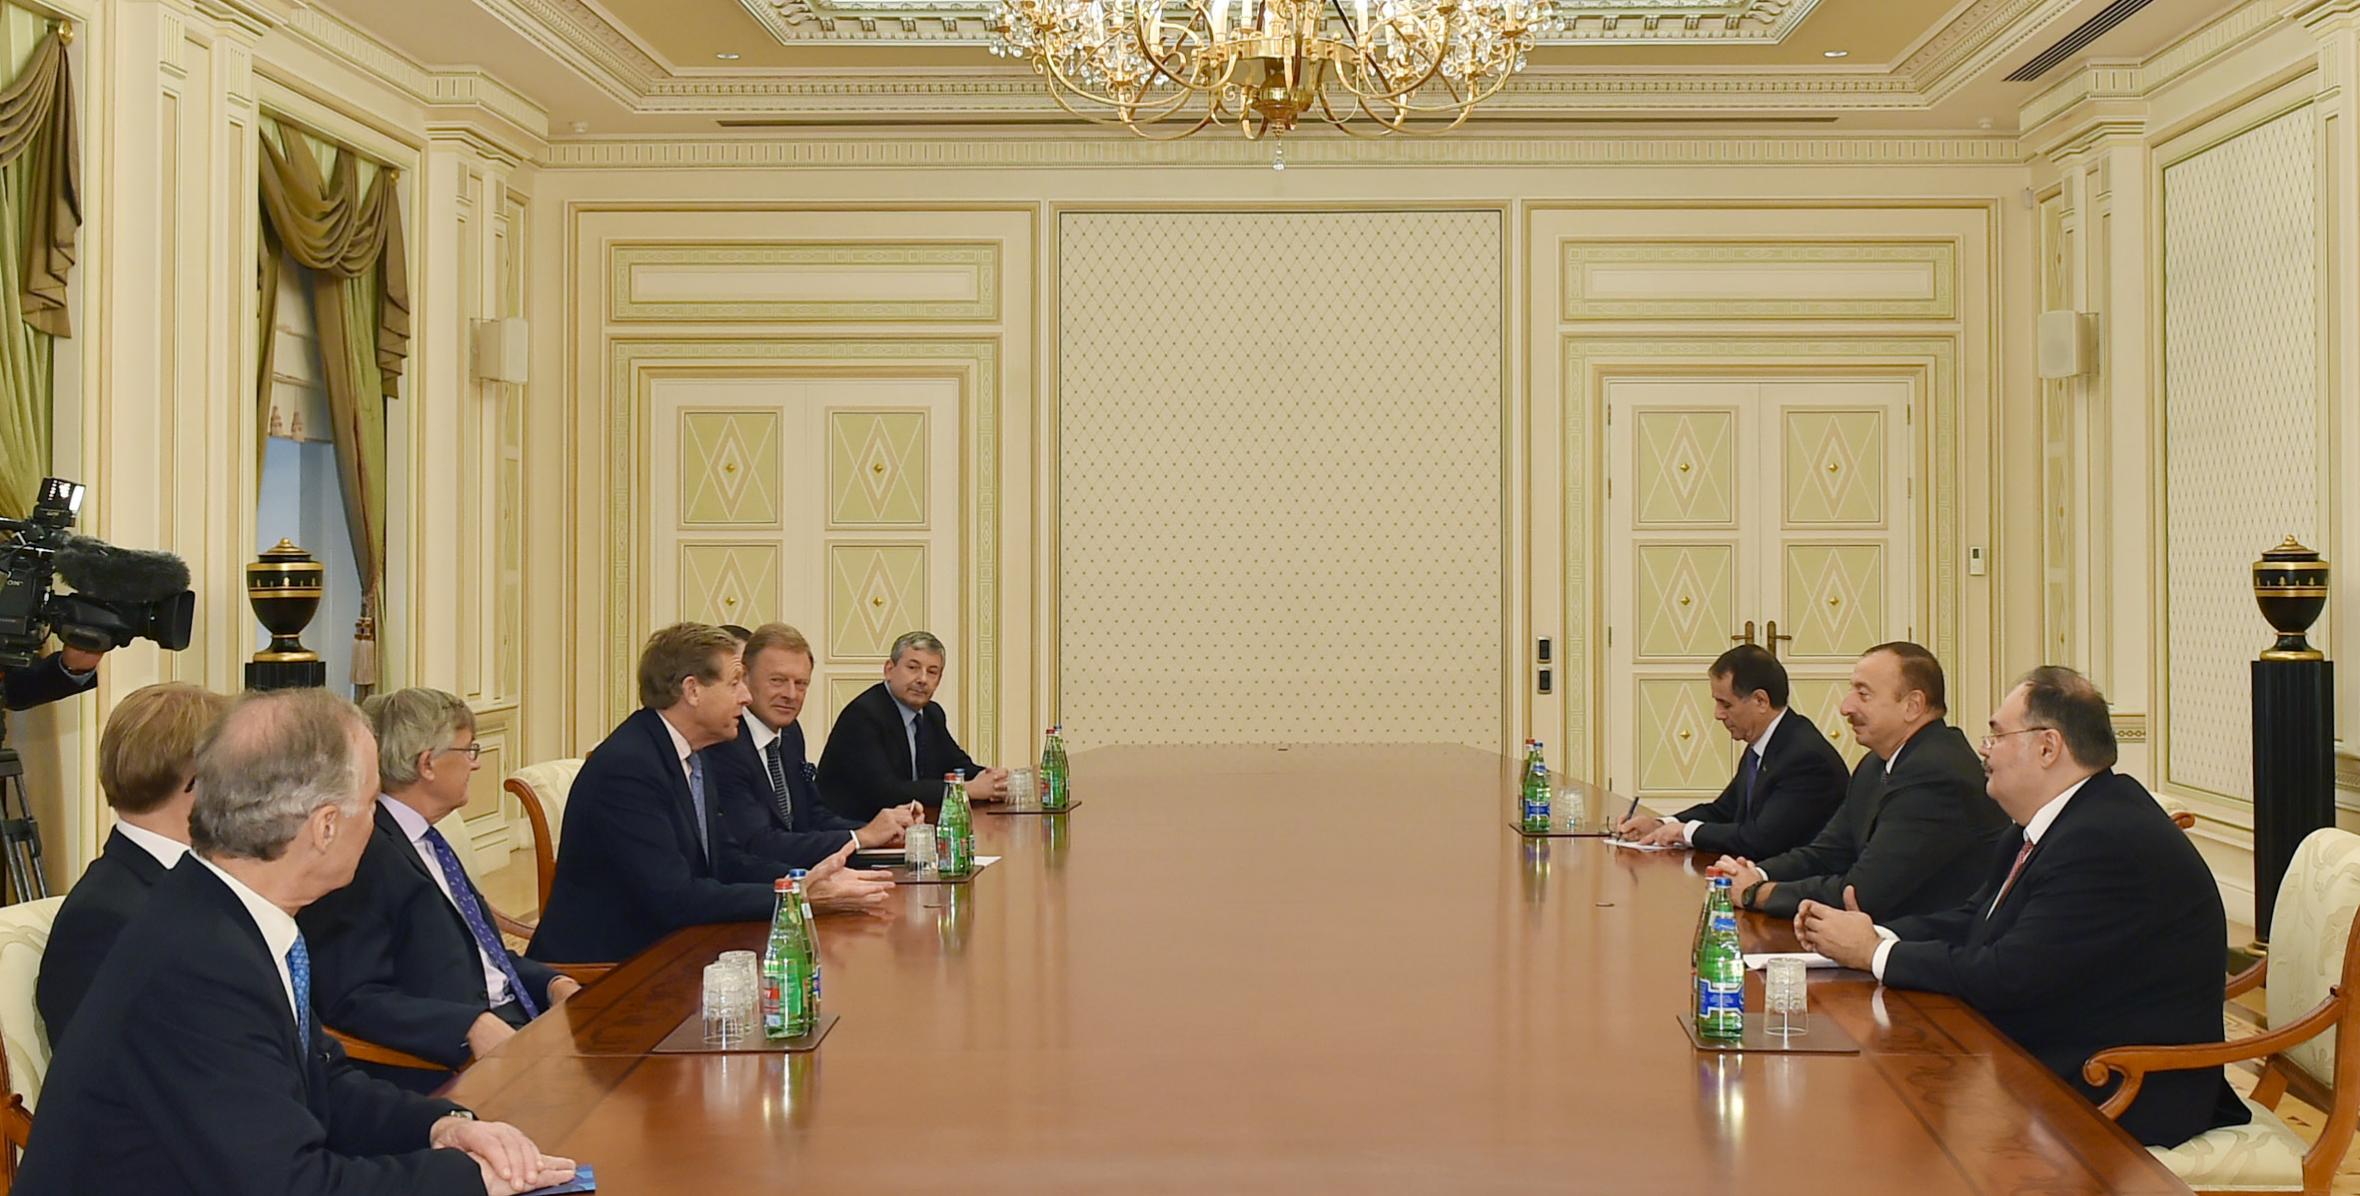 Ilham Aliyev received a delegation led by British Prime Ministerial Trade Envoy Lord Risby